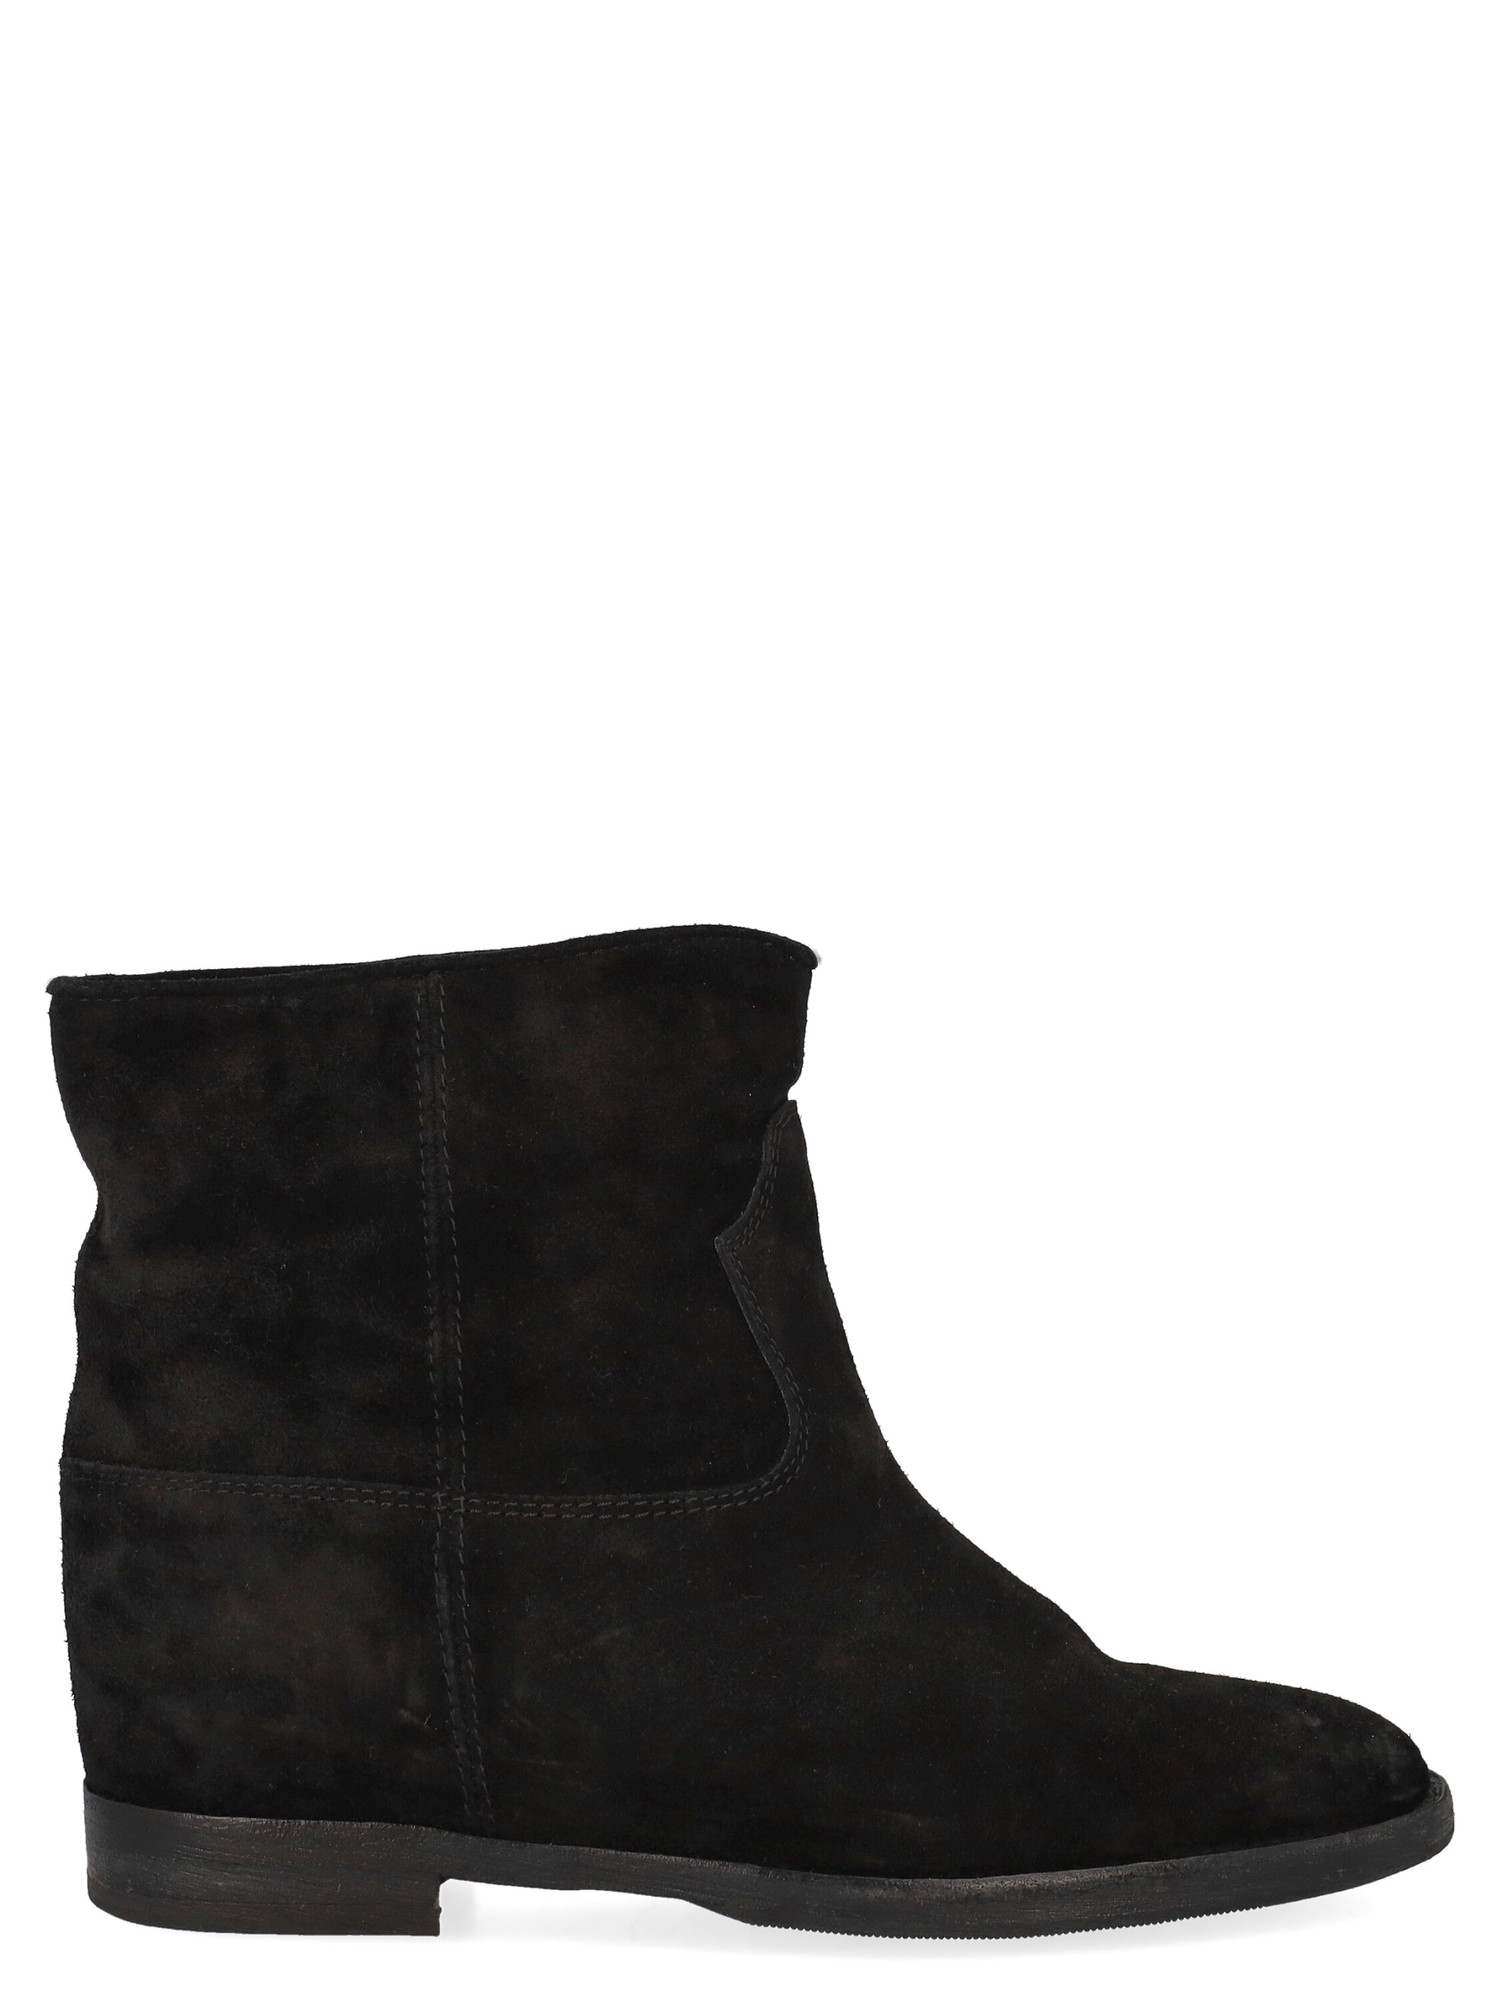 Pre-owned Paris Texas Women's Ankle Boots -  - In Black Leather